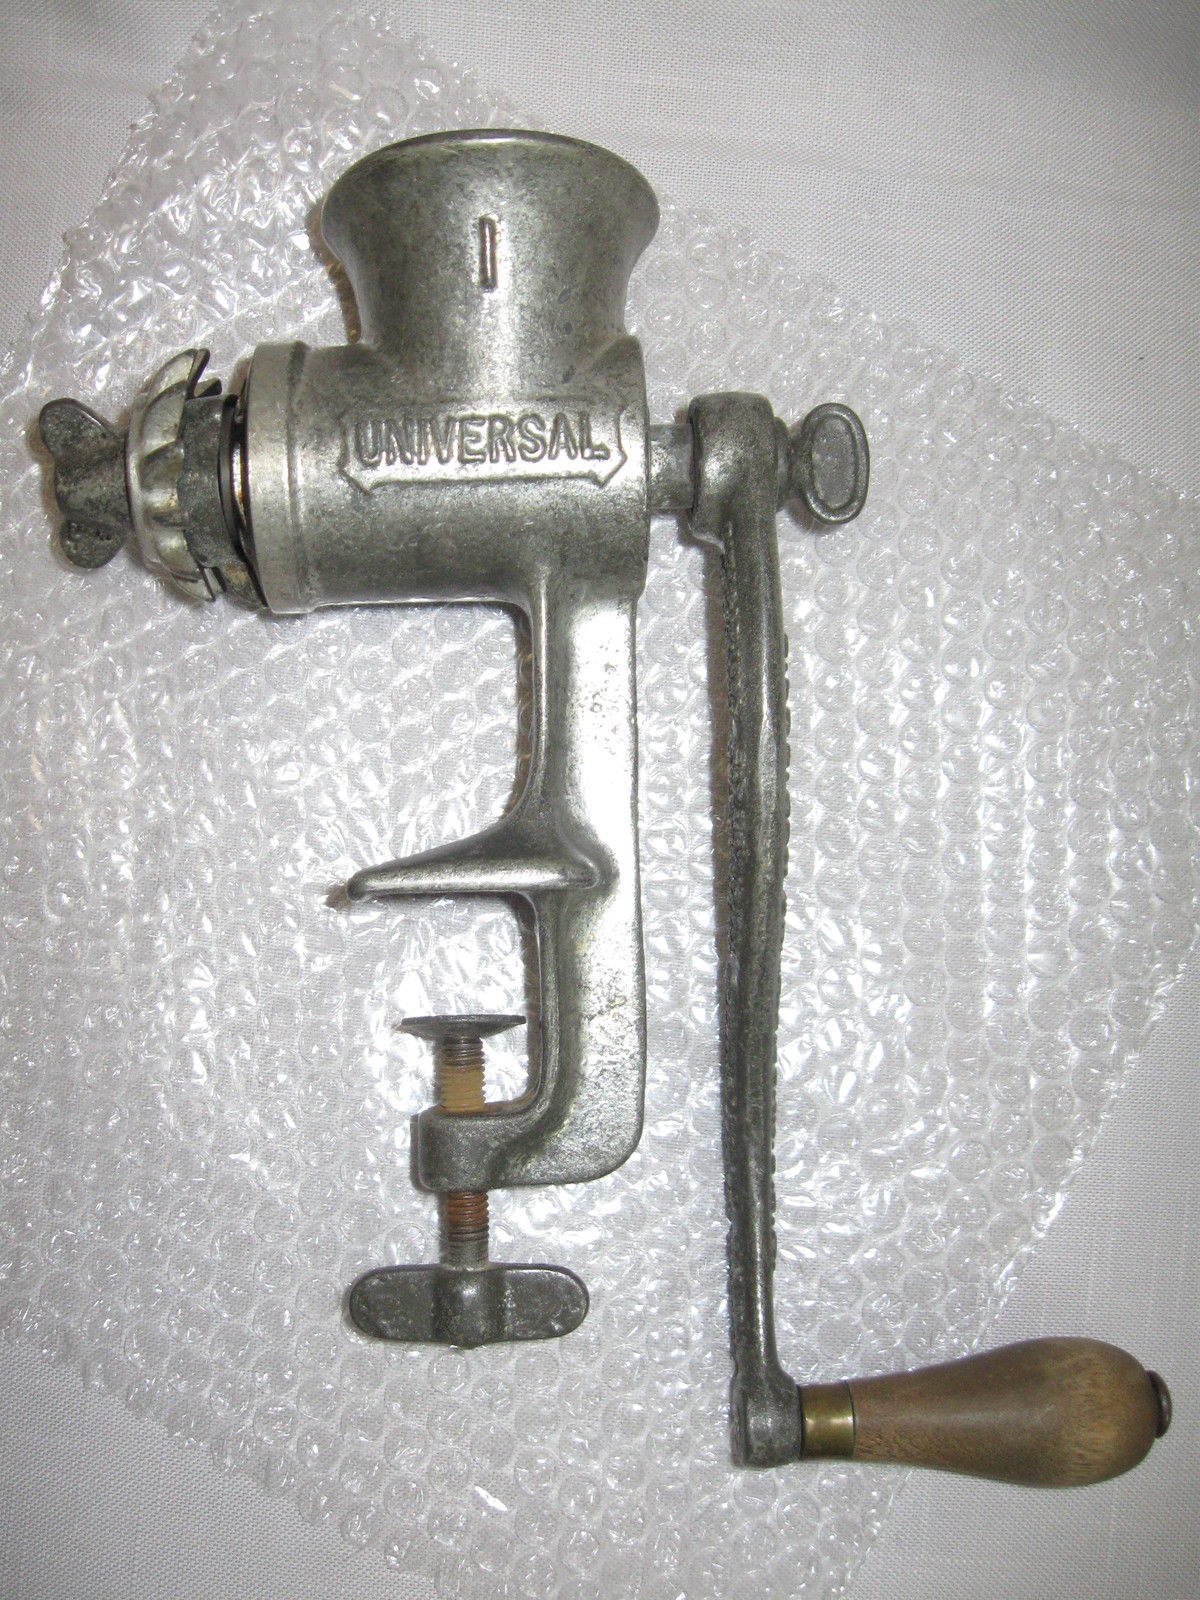 universal food and meat chopper 2